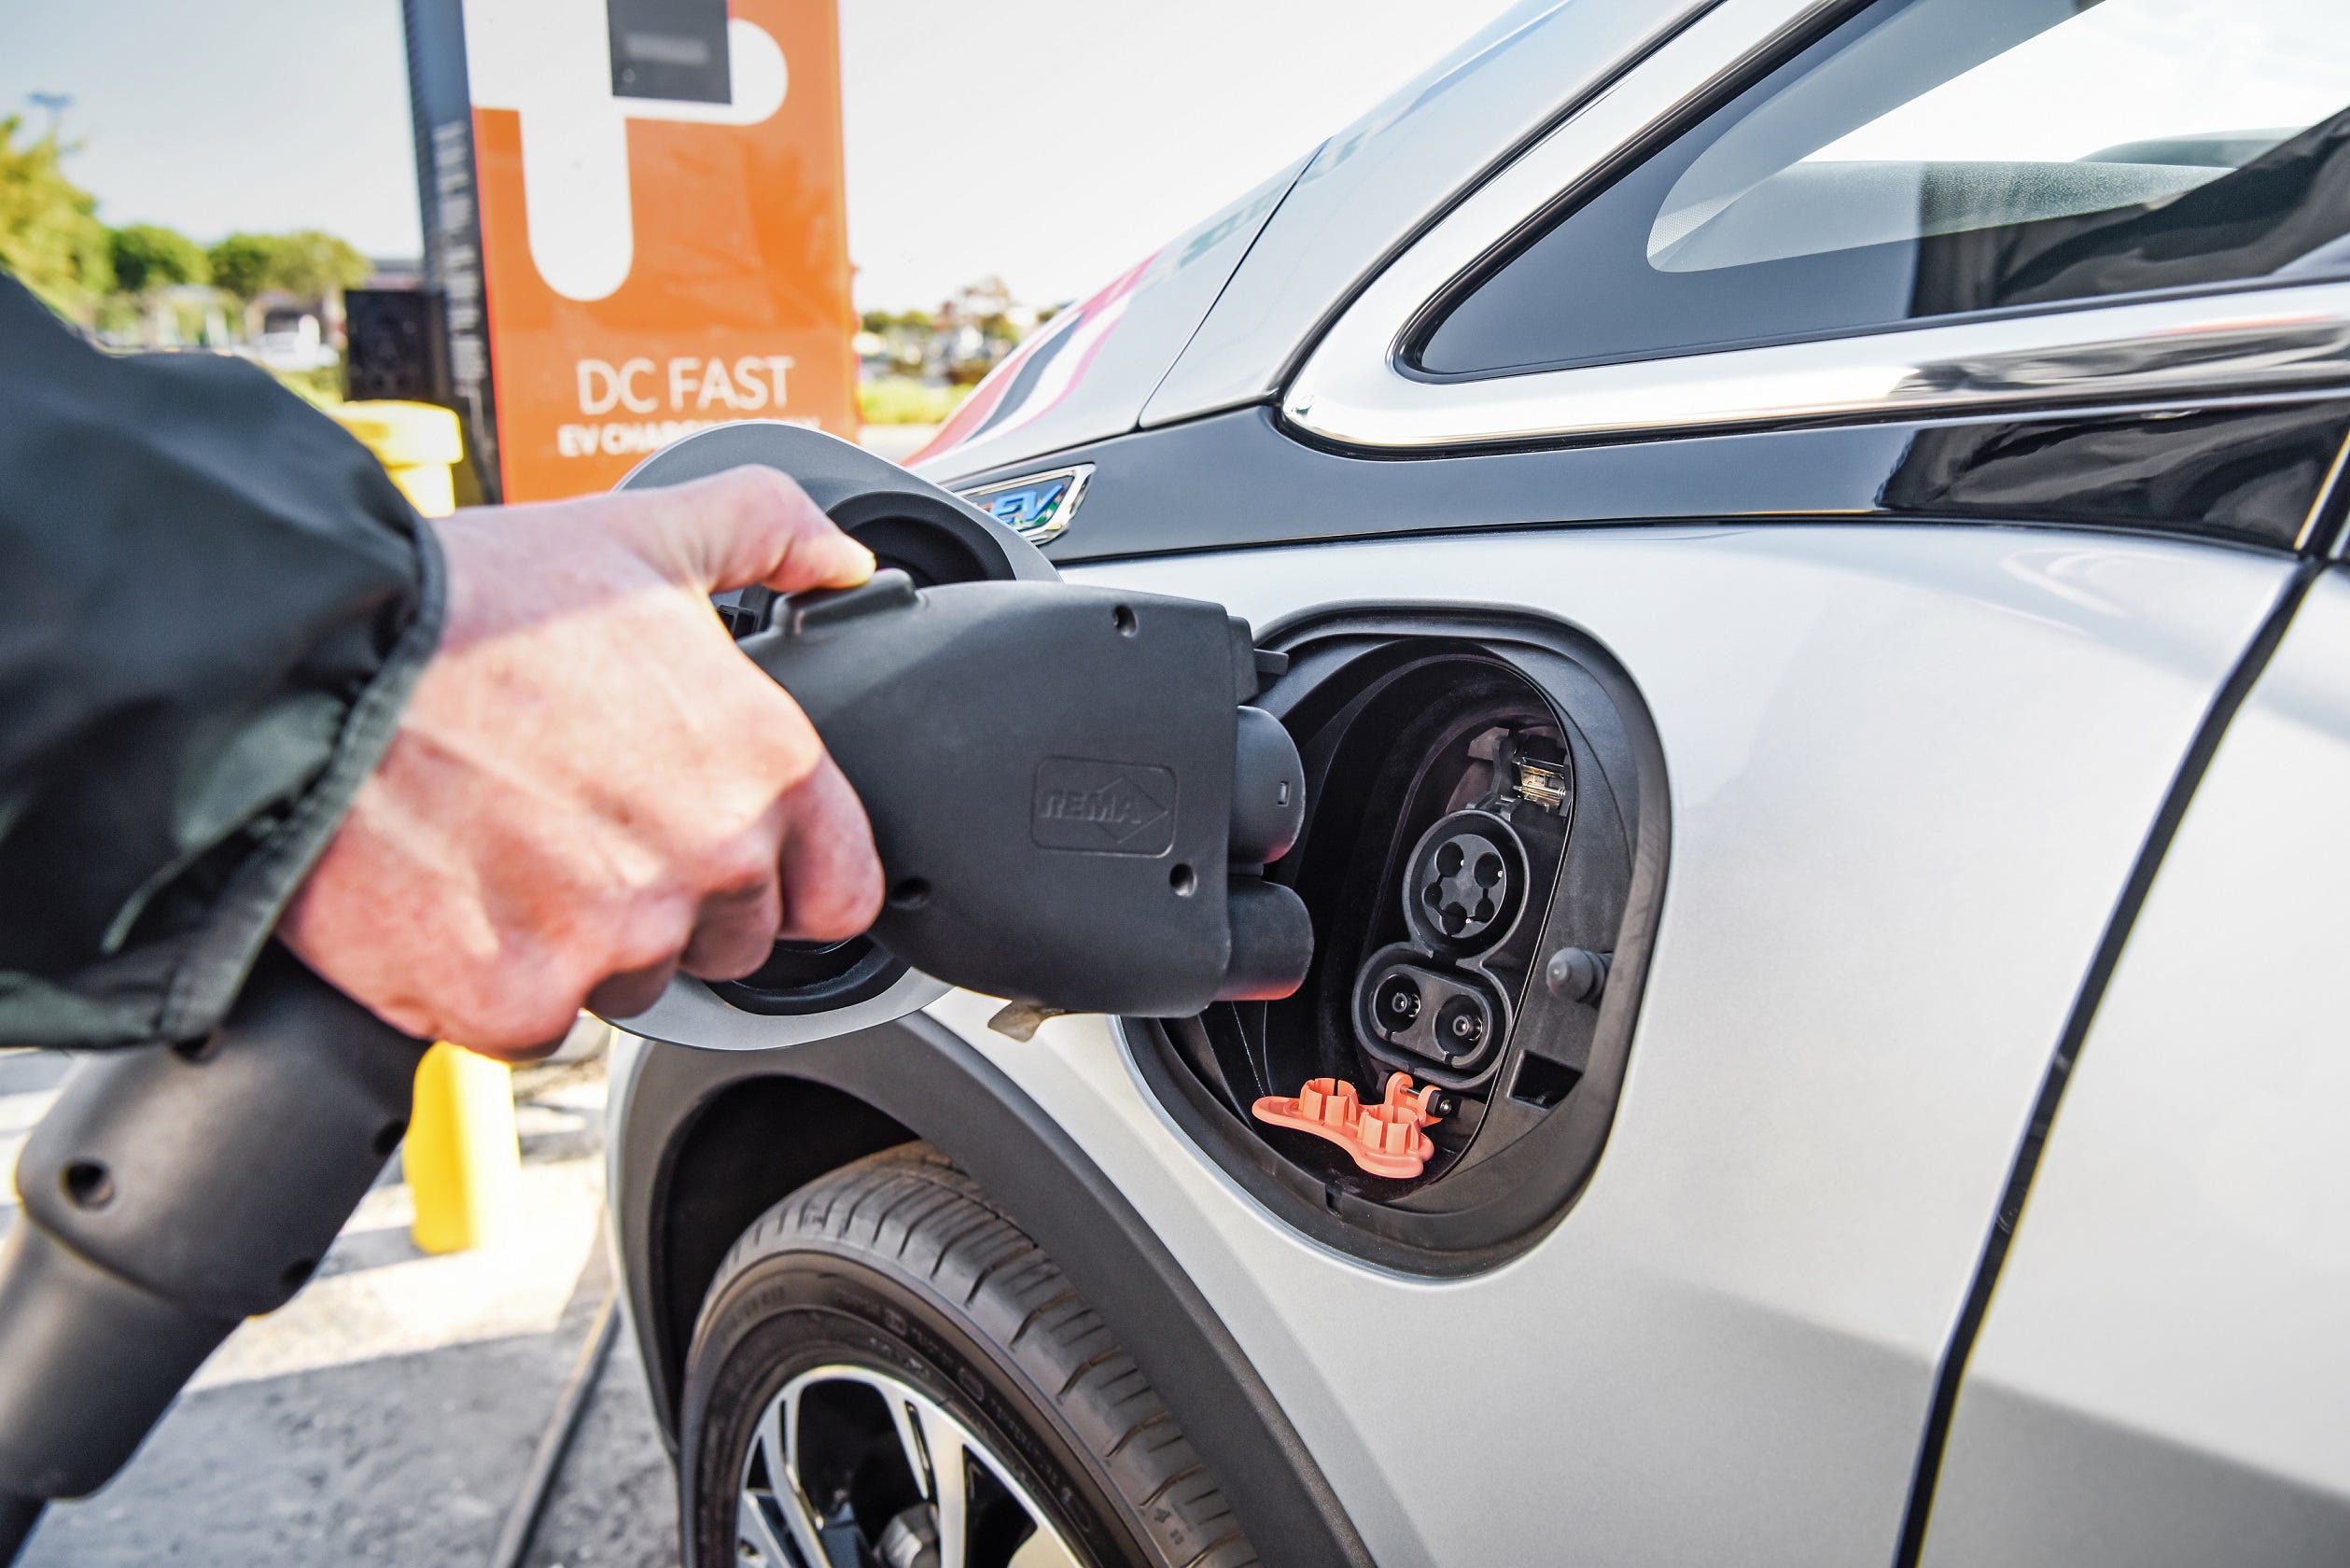 GM announced Wednesday it is collaborating with EVgo, ChargePoint and Greenlots to aggregated data from each of the three EV charging networks for use in an updated version of the myChevrolet app.